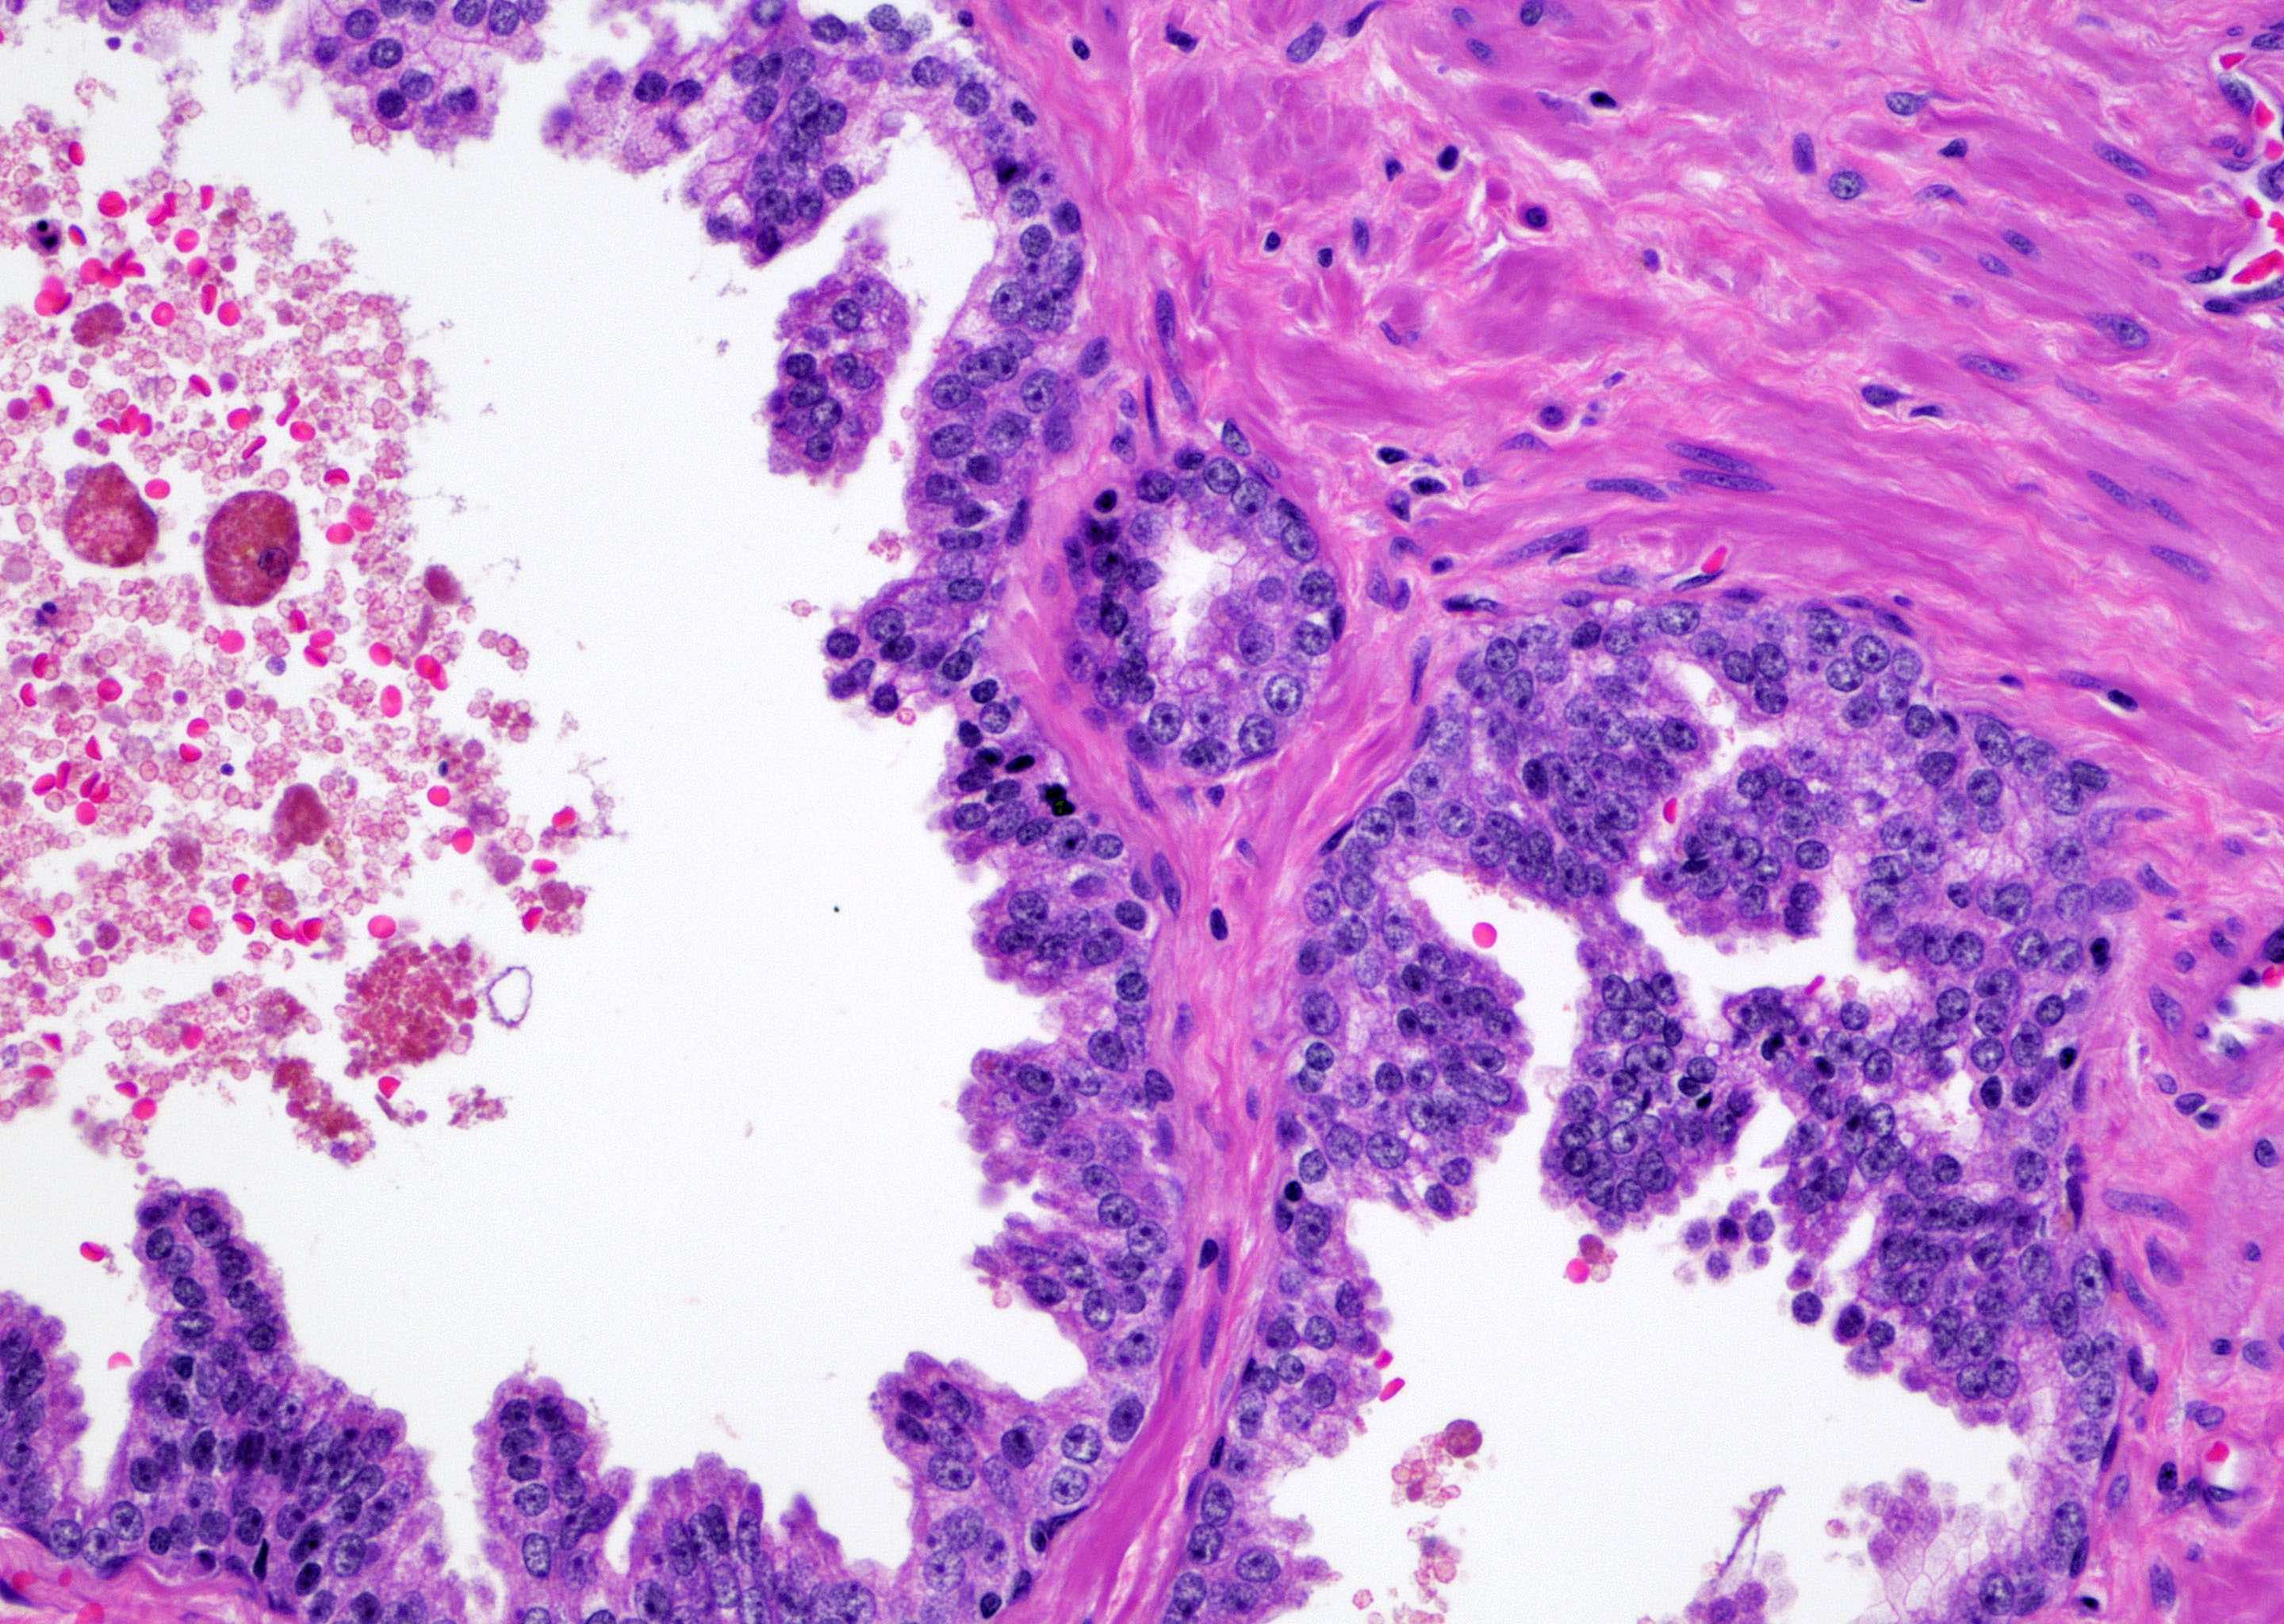 Atypical gland in 2 HGPINs